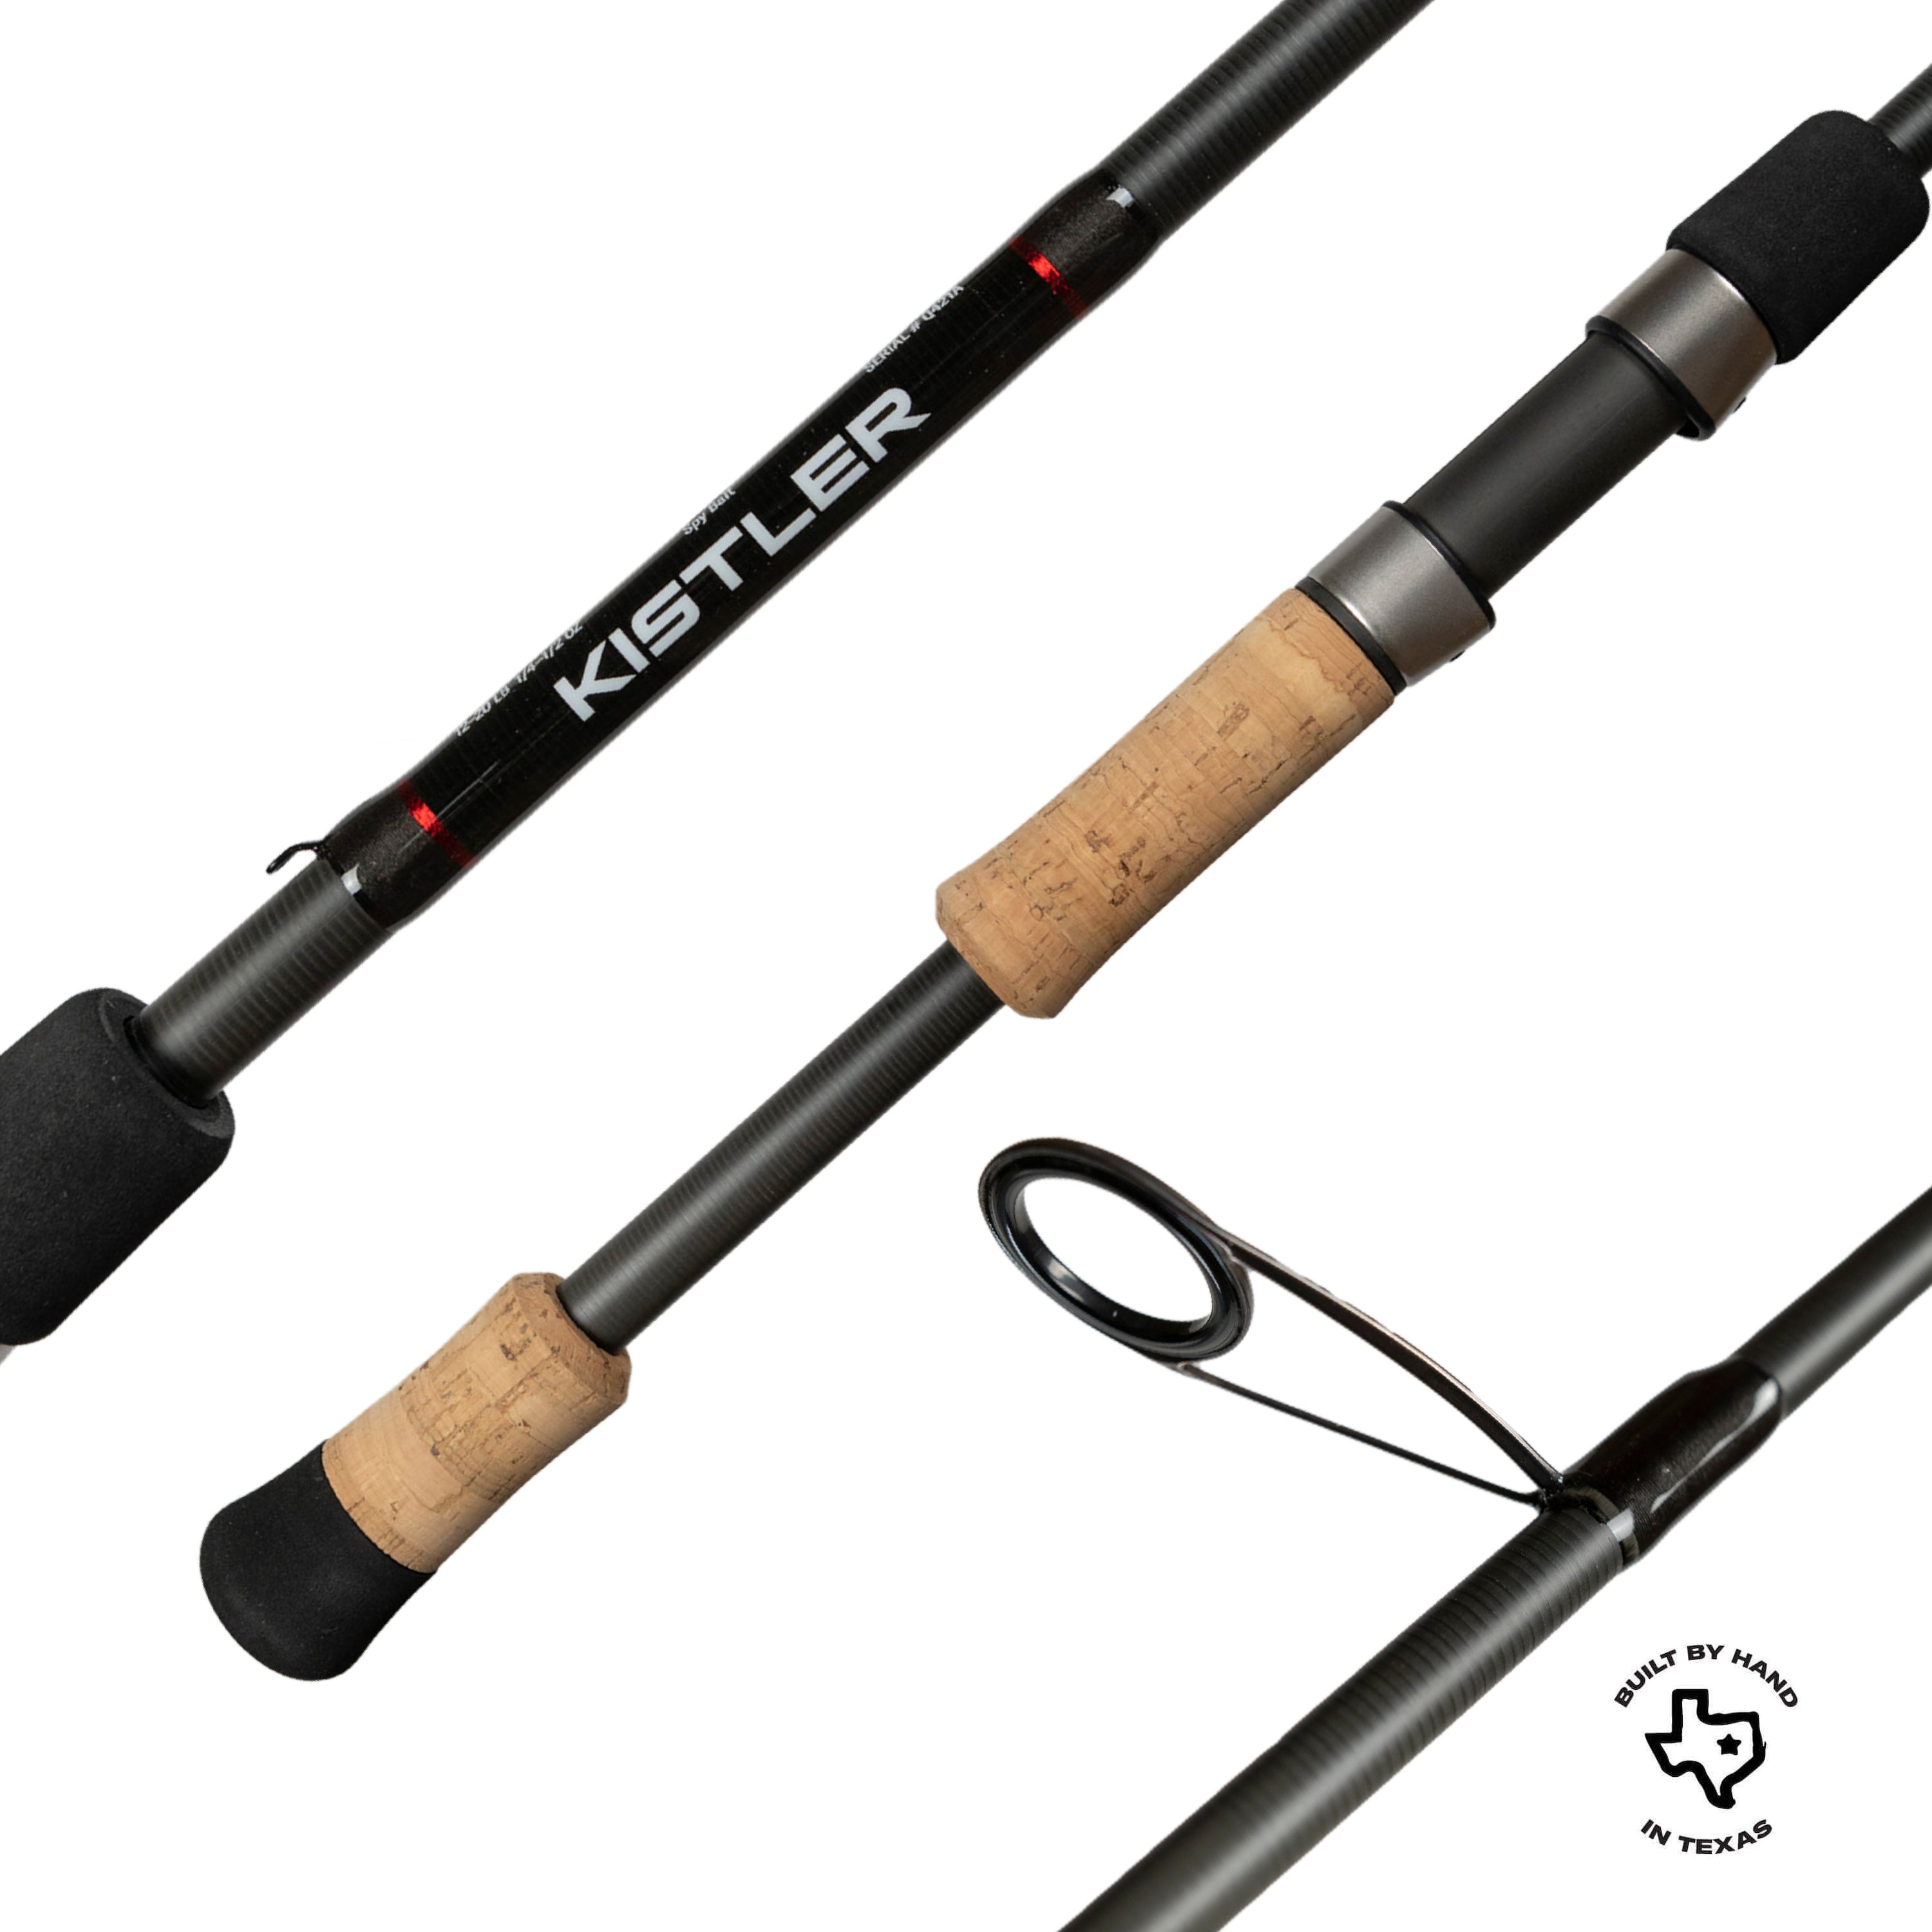 Top 10 Best Telescopic Fishing Rods in 2021 - Reviews & Buying